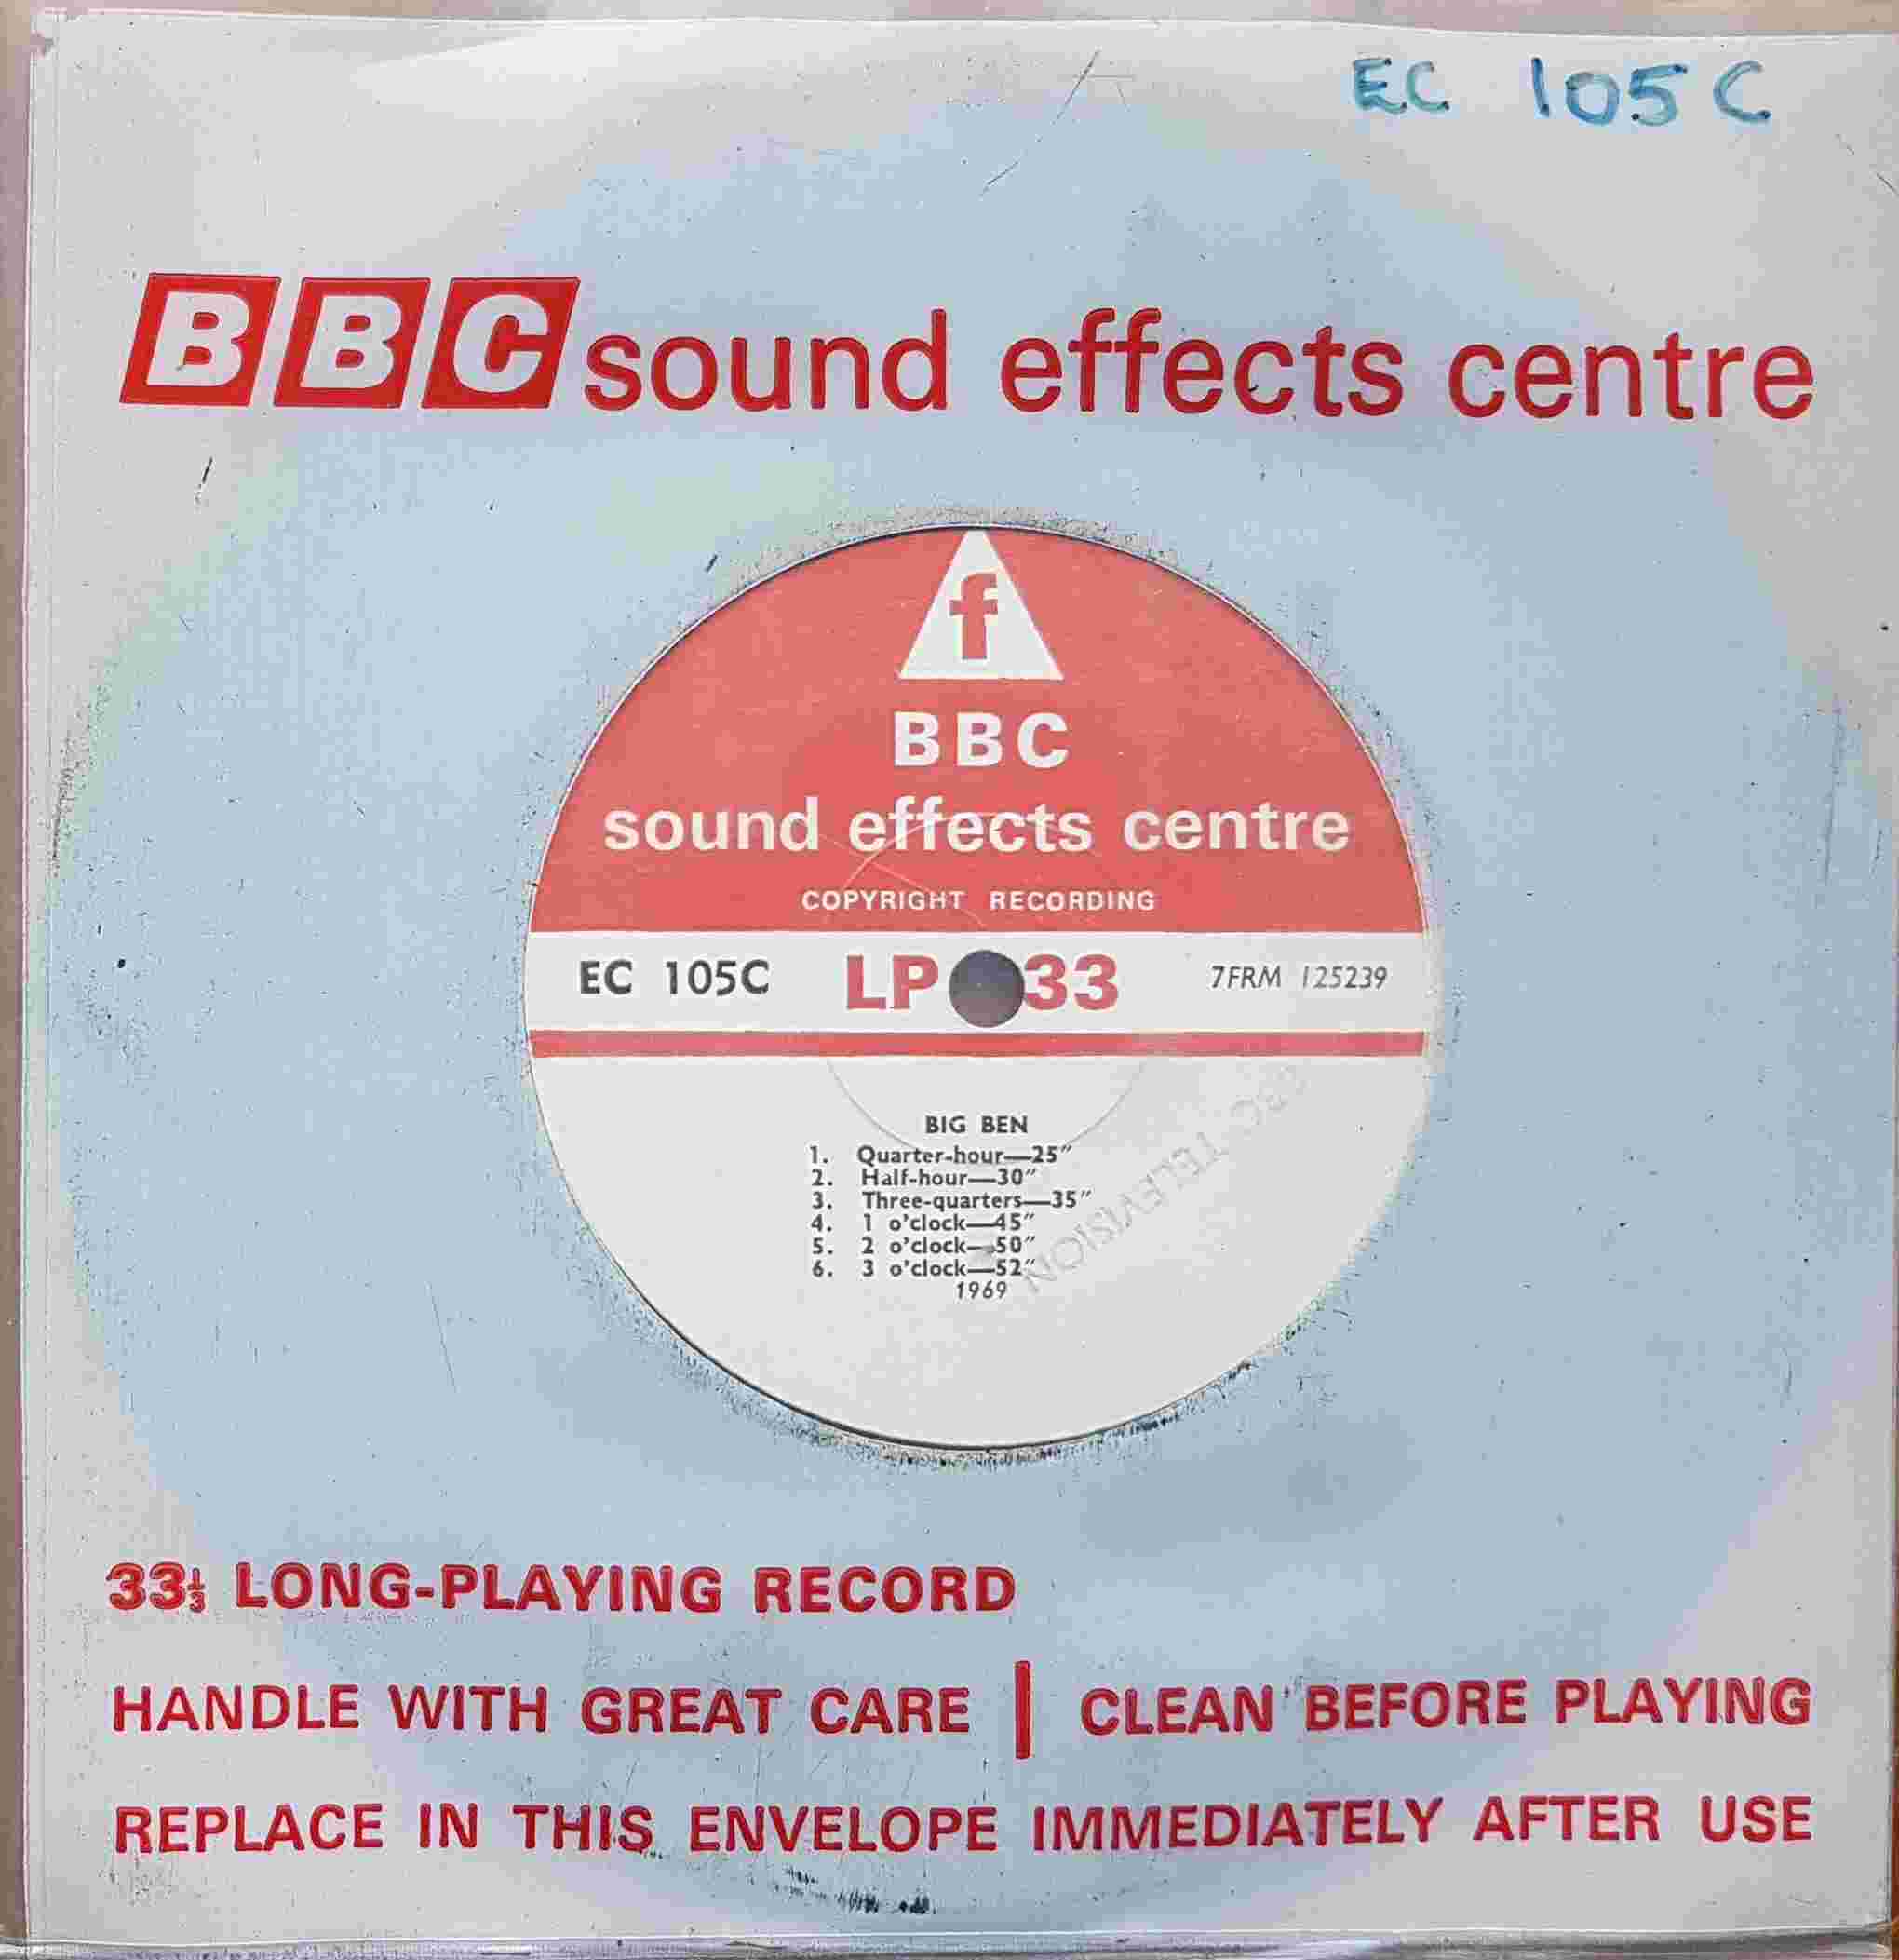 Picture of EC 105C Big Ben by artist Not registered from the BBC singles - Records and Tapes library